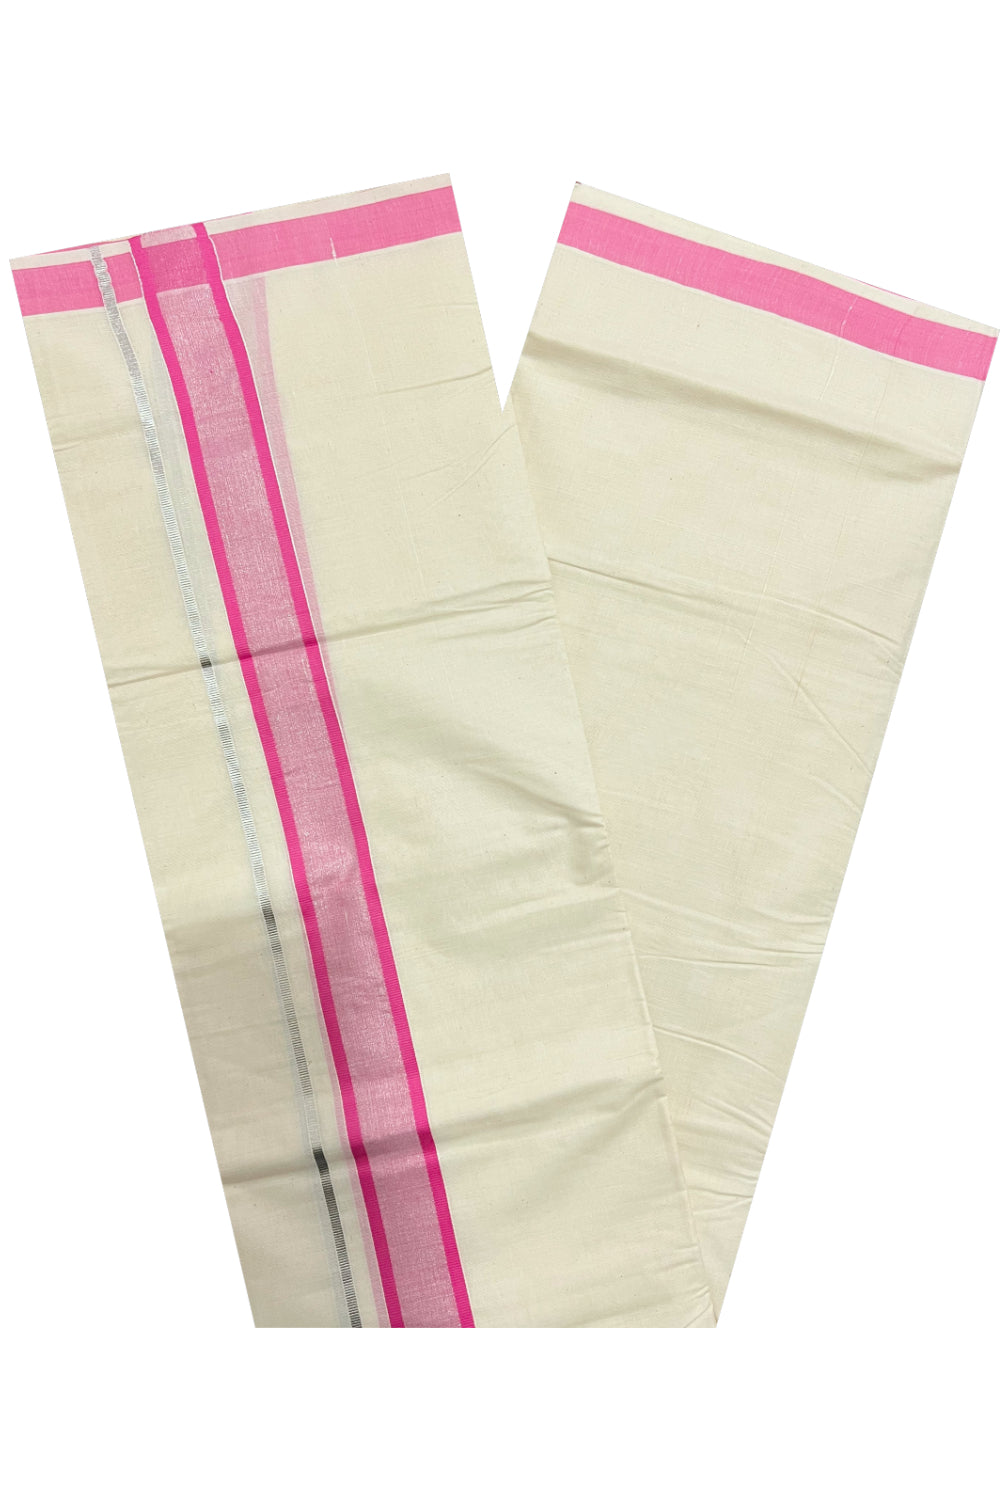 Pure Cotton Off White Double Mundu with Silver Kasavu and Pink Border (South Indian Dhoti)